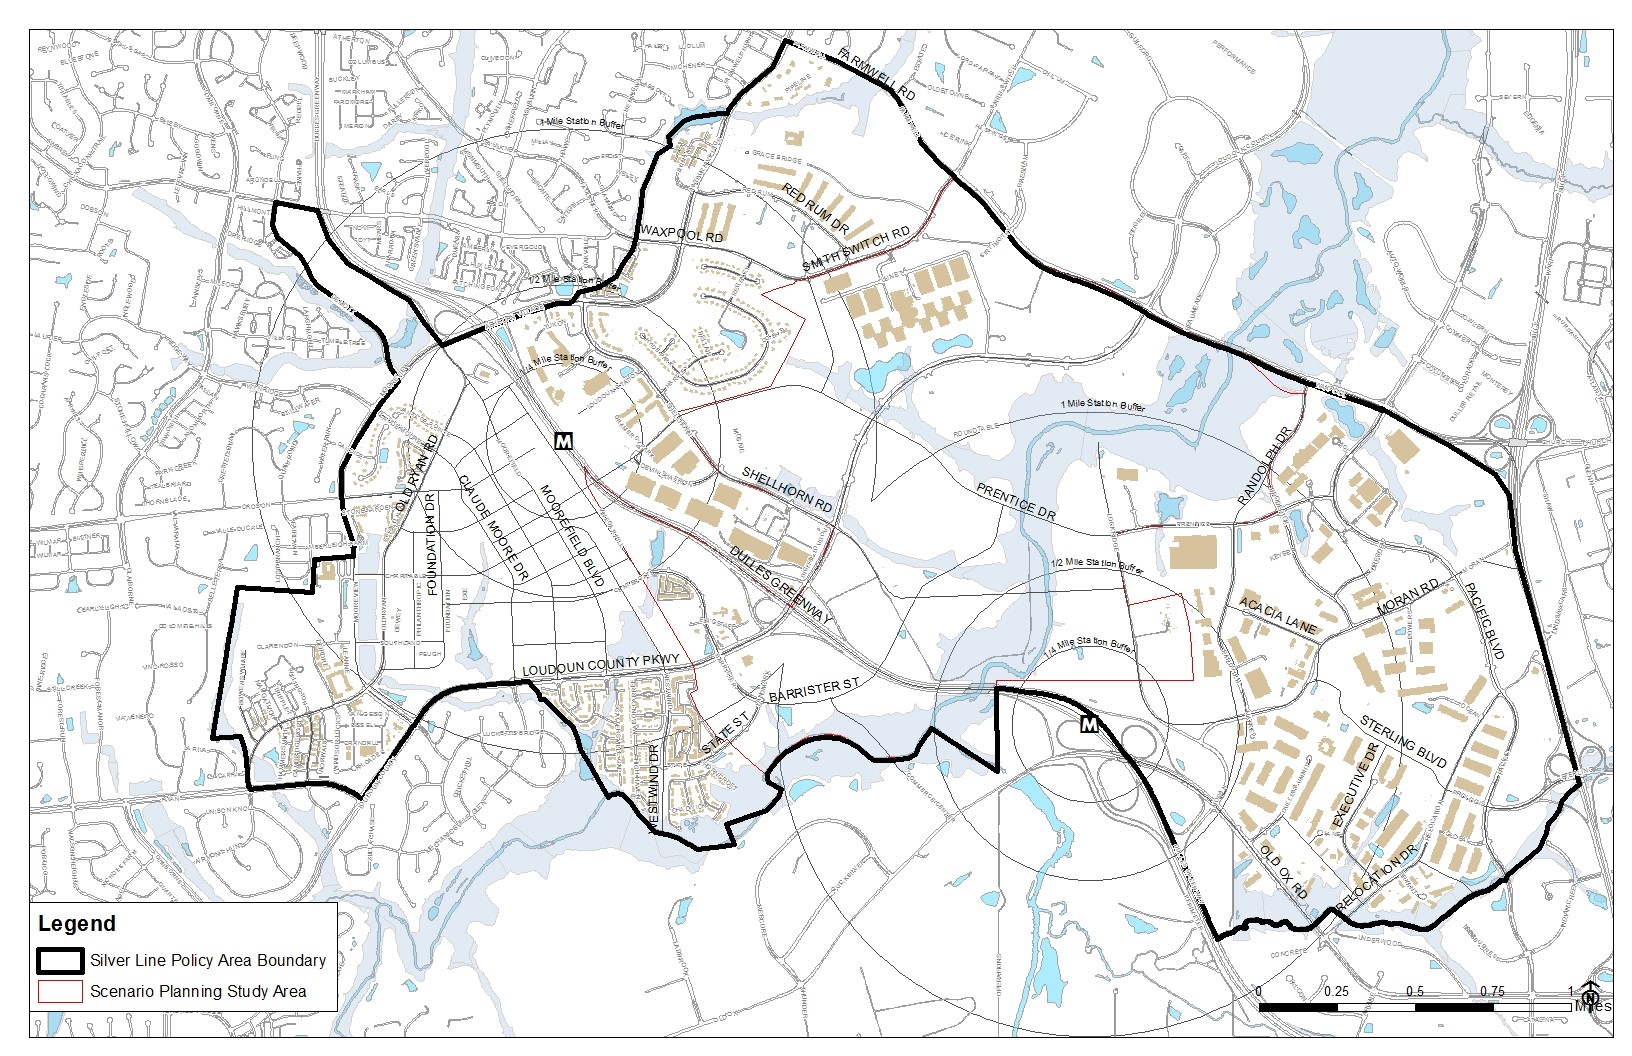 Silver Line Policy Area Plan Boundary map